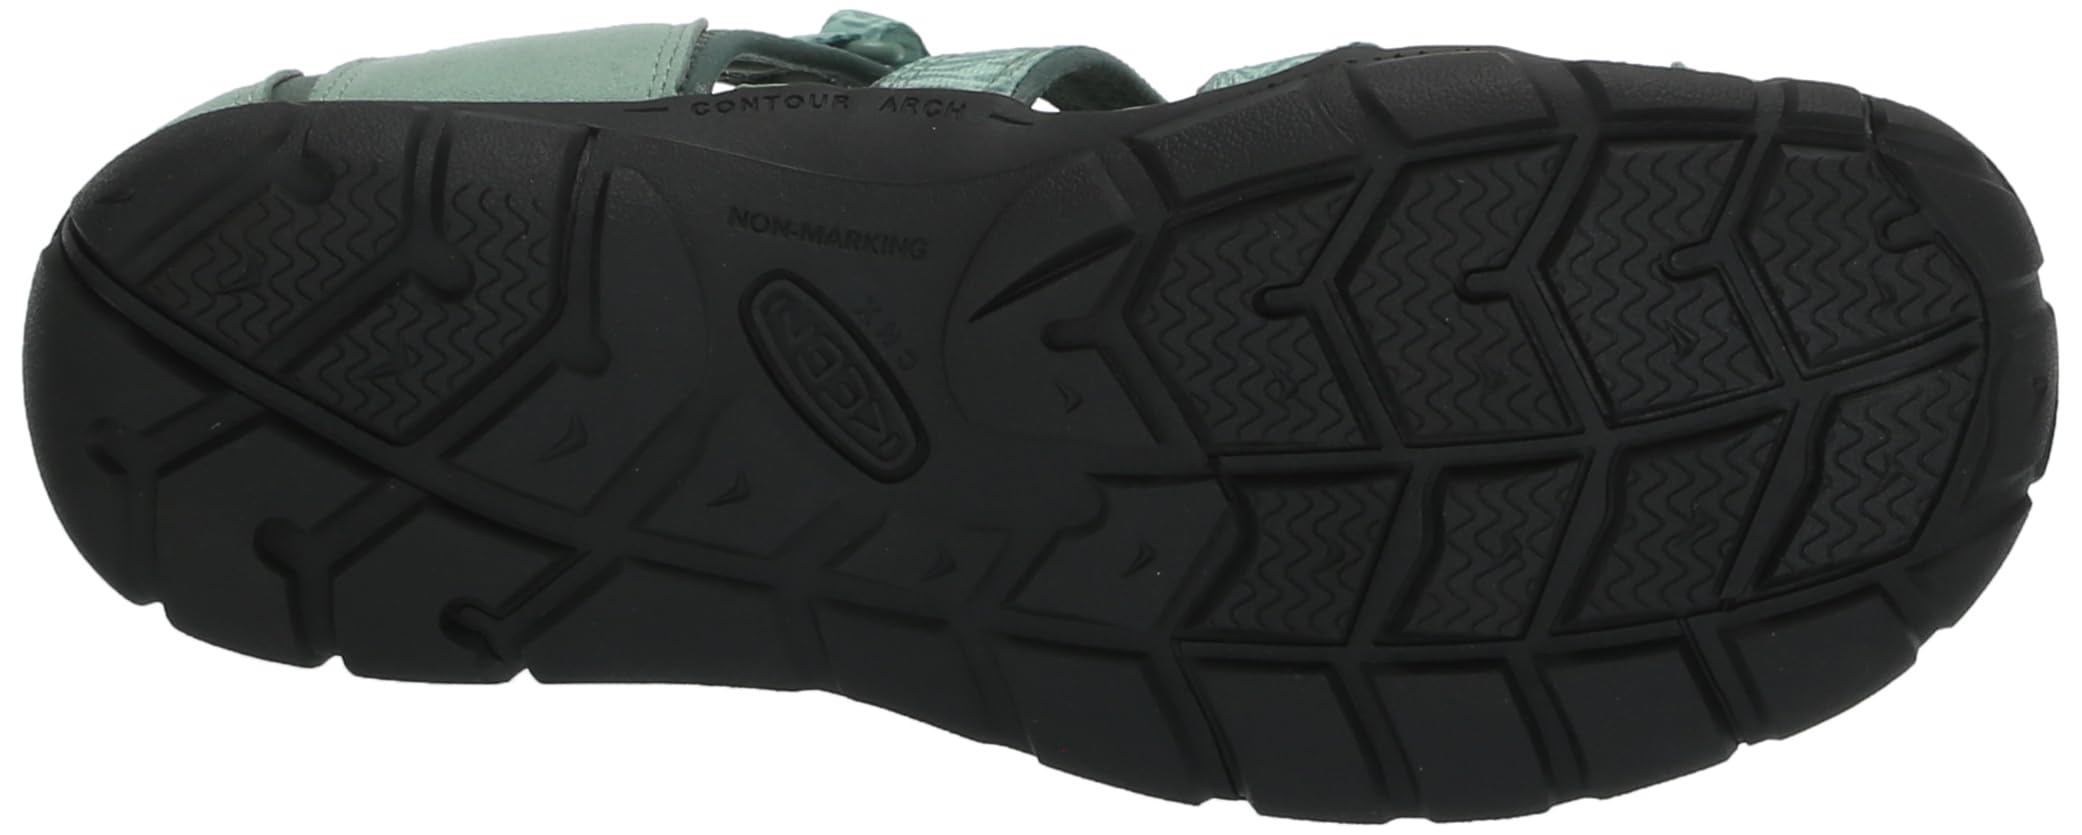 KEEN Kids Seacamp 2 CNX Closed Toe Sandals, Granite Green/Cayenne, 6 US Unisex Toddler